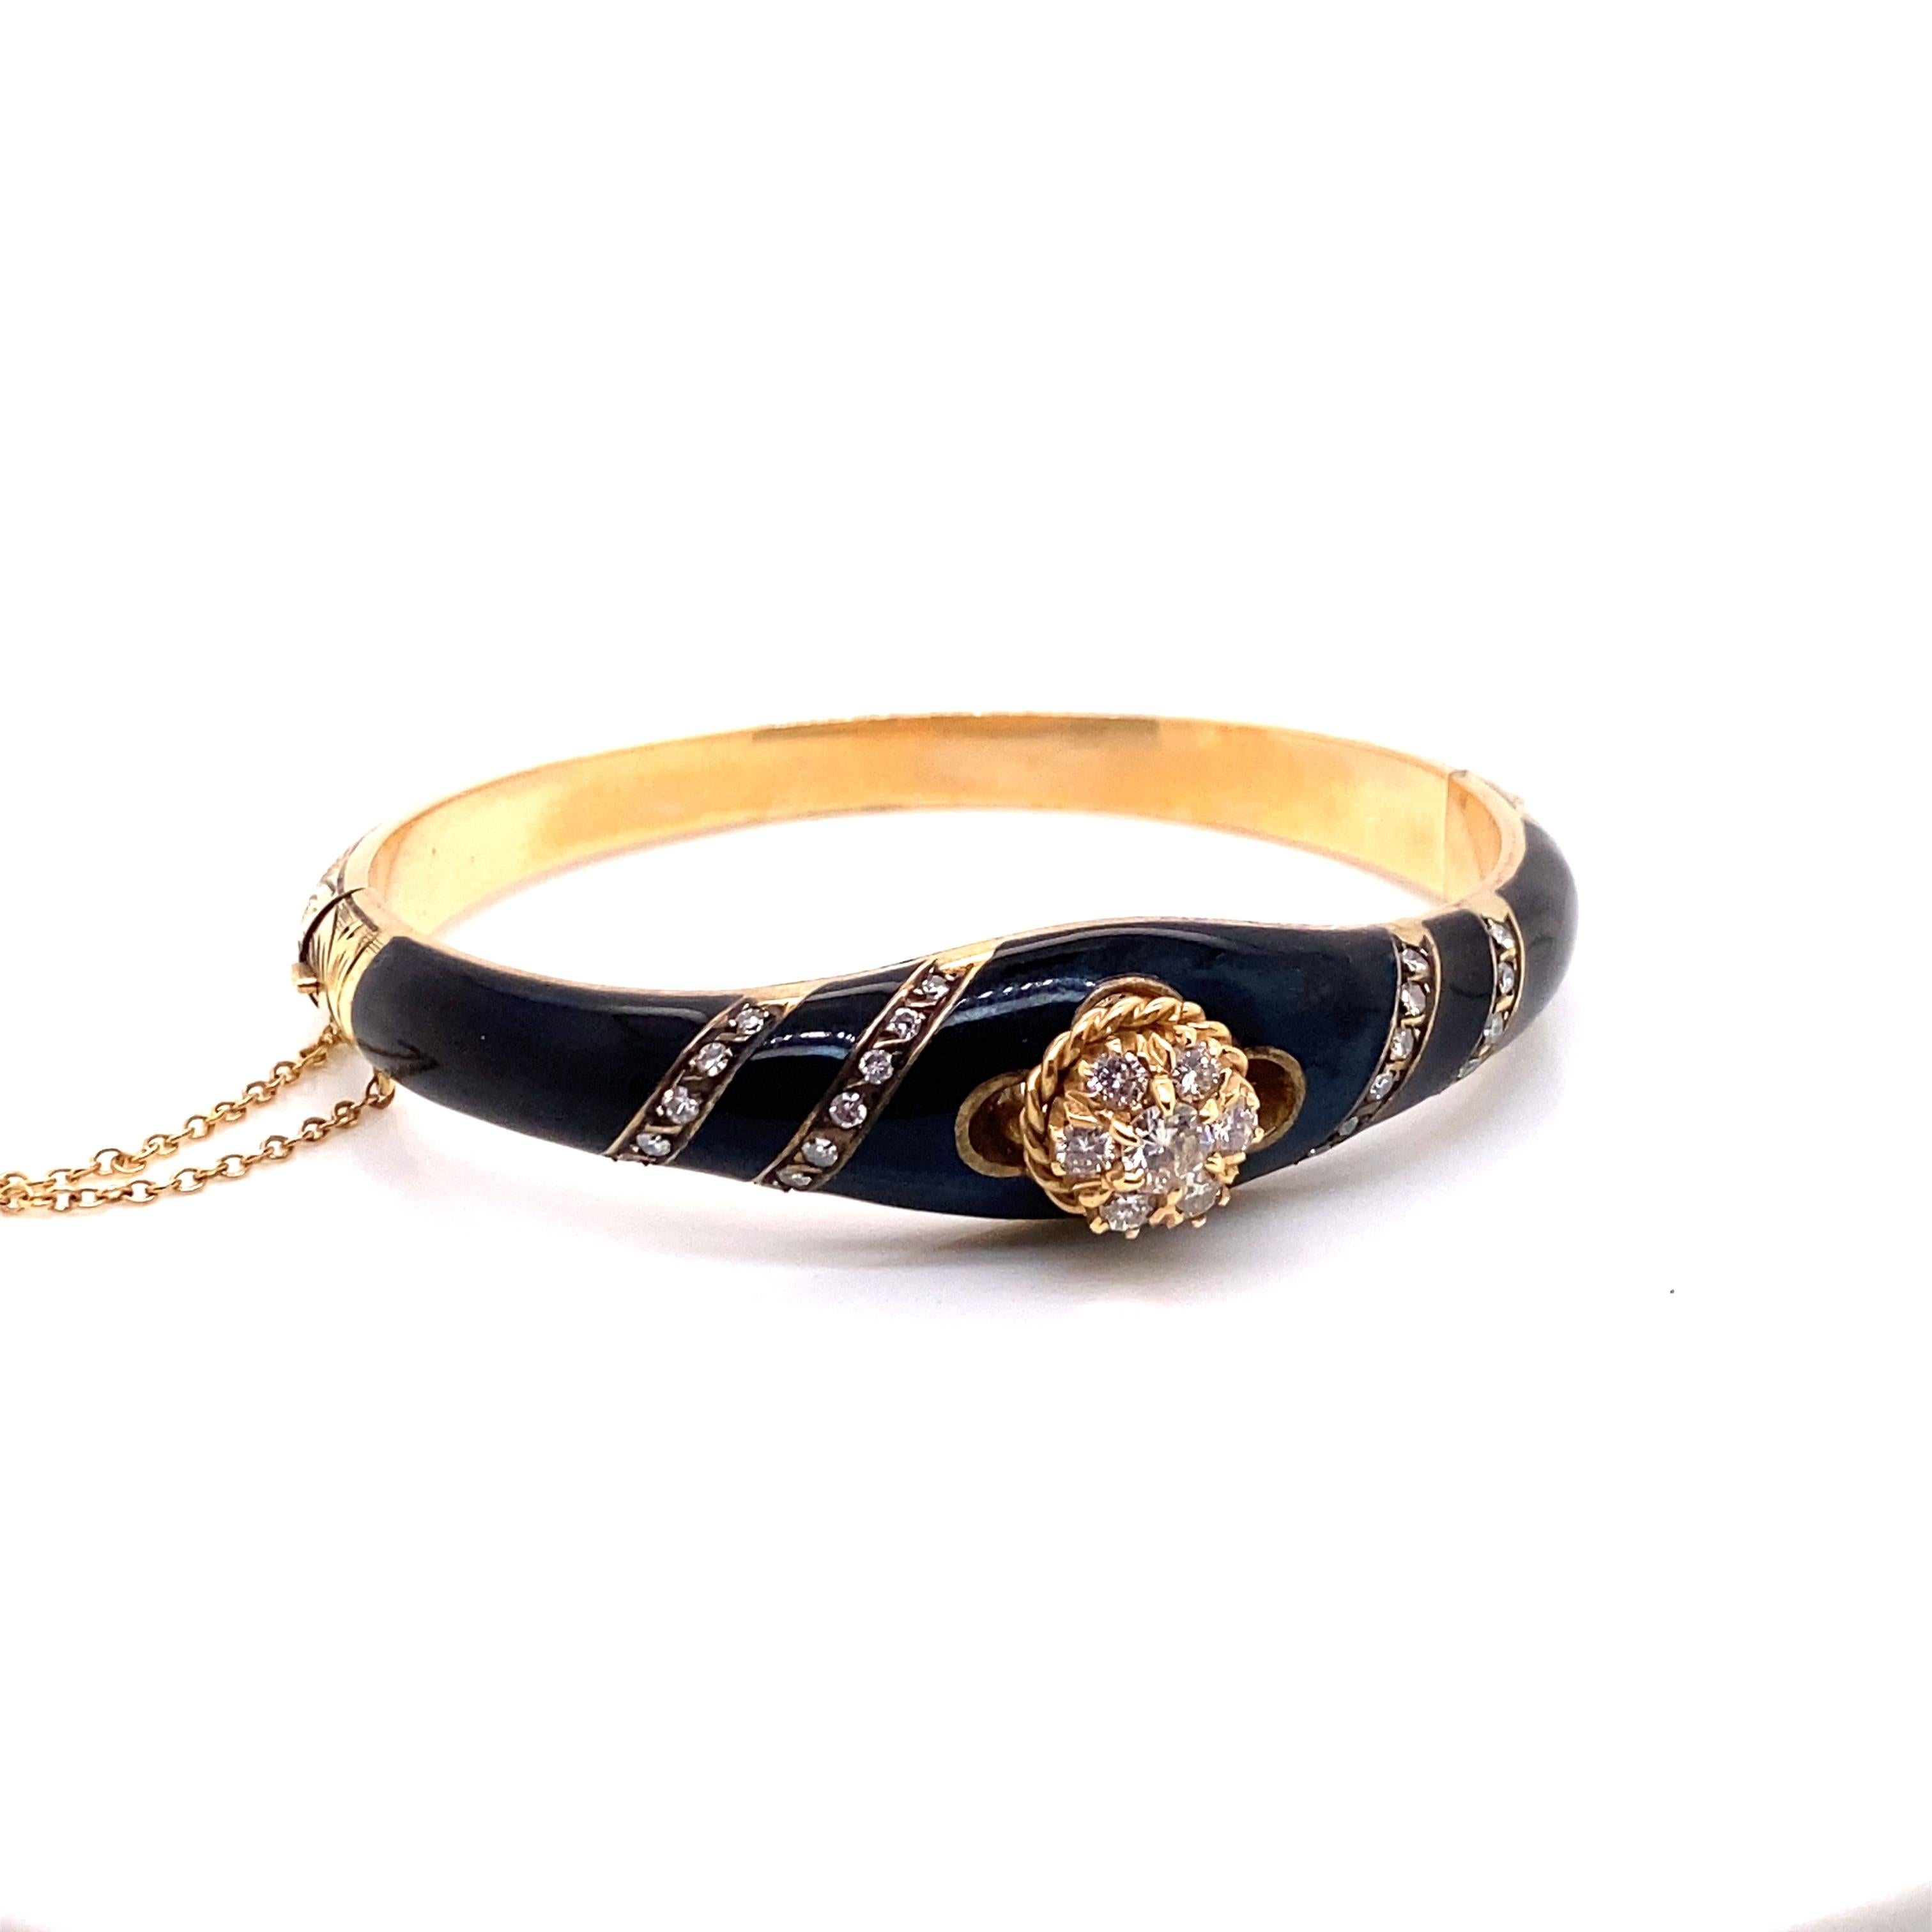 Vintage Victorian Reproduction 14K Yellow Gold Onyx and Diamond Bangle - The bracelet contains 7 round brilliant diamonds which are set in a flower cluster with a total approximate weight of .50ct. The diamond quality is G - H color VS2 clarity.